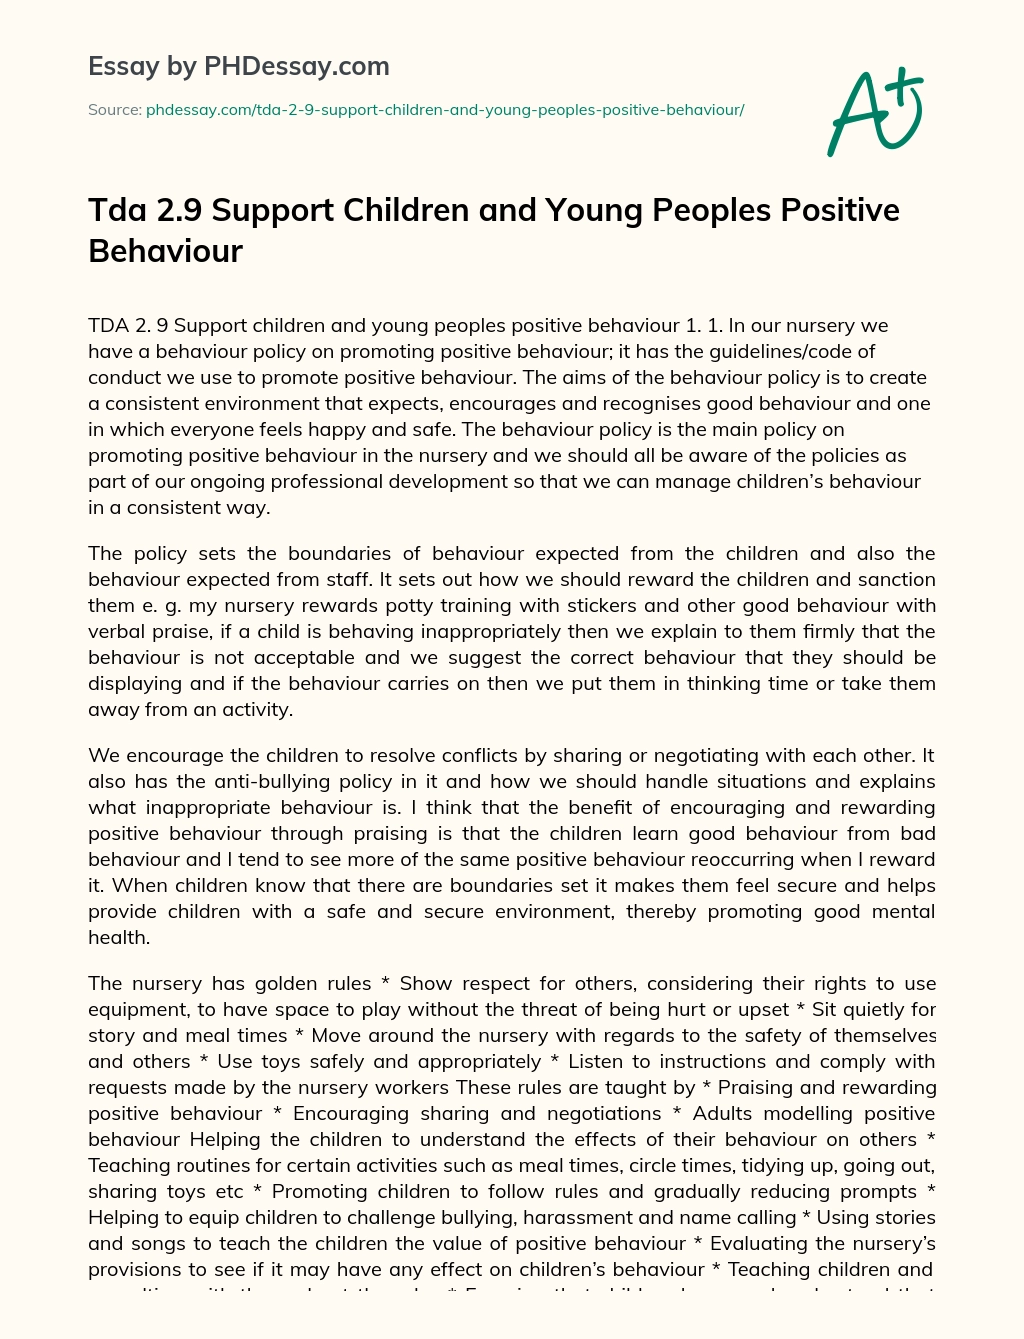 Support Children and Young Peoples Positive Behaviour essay